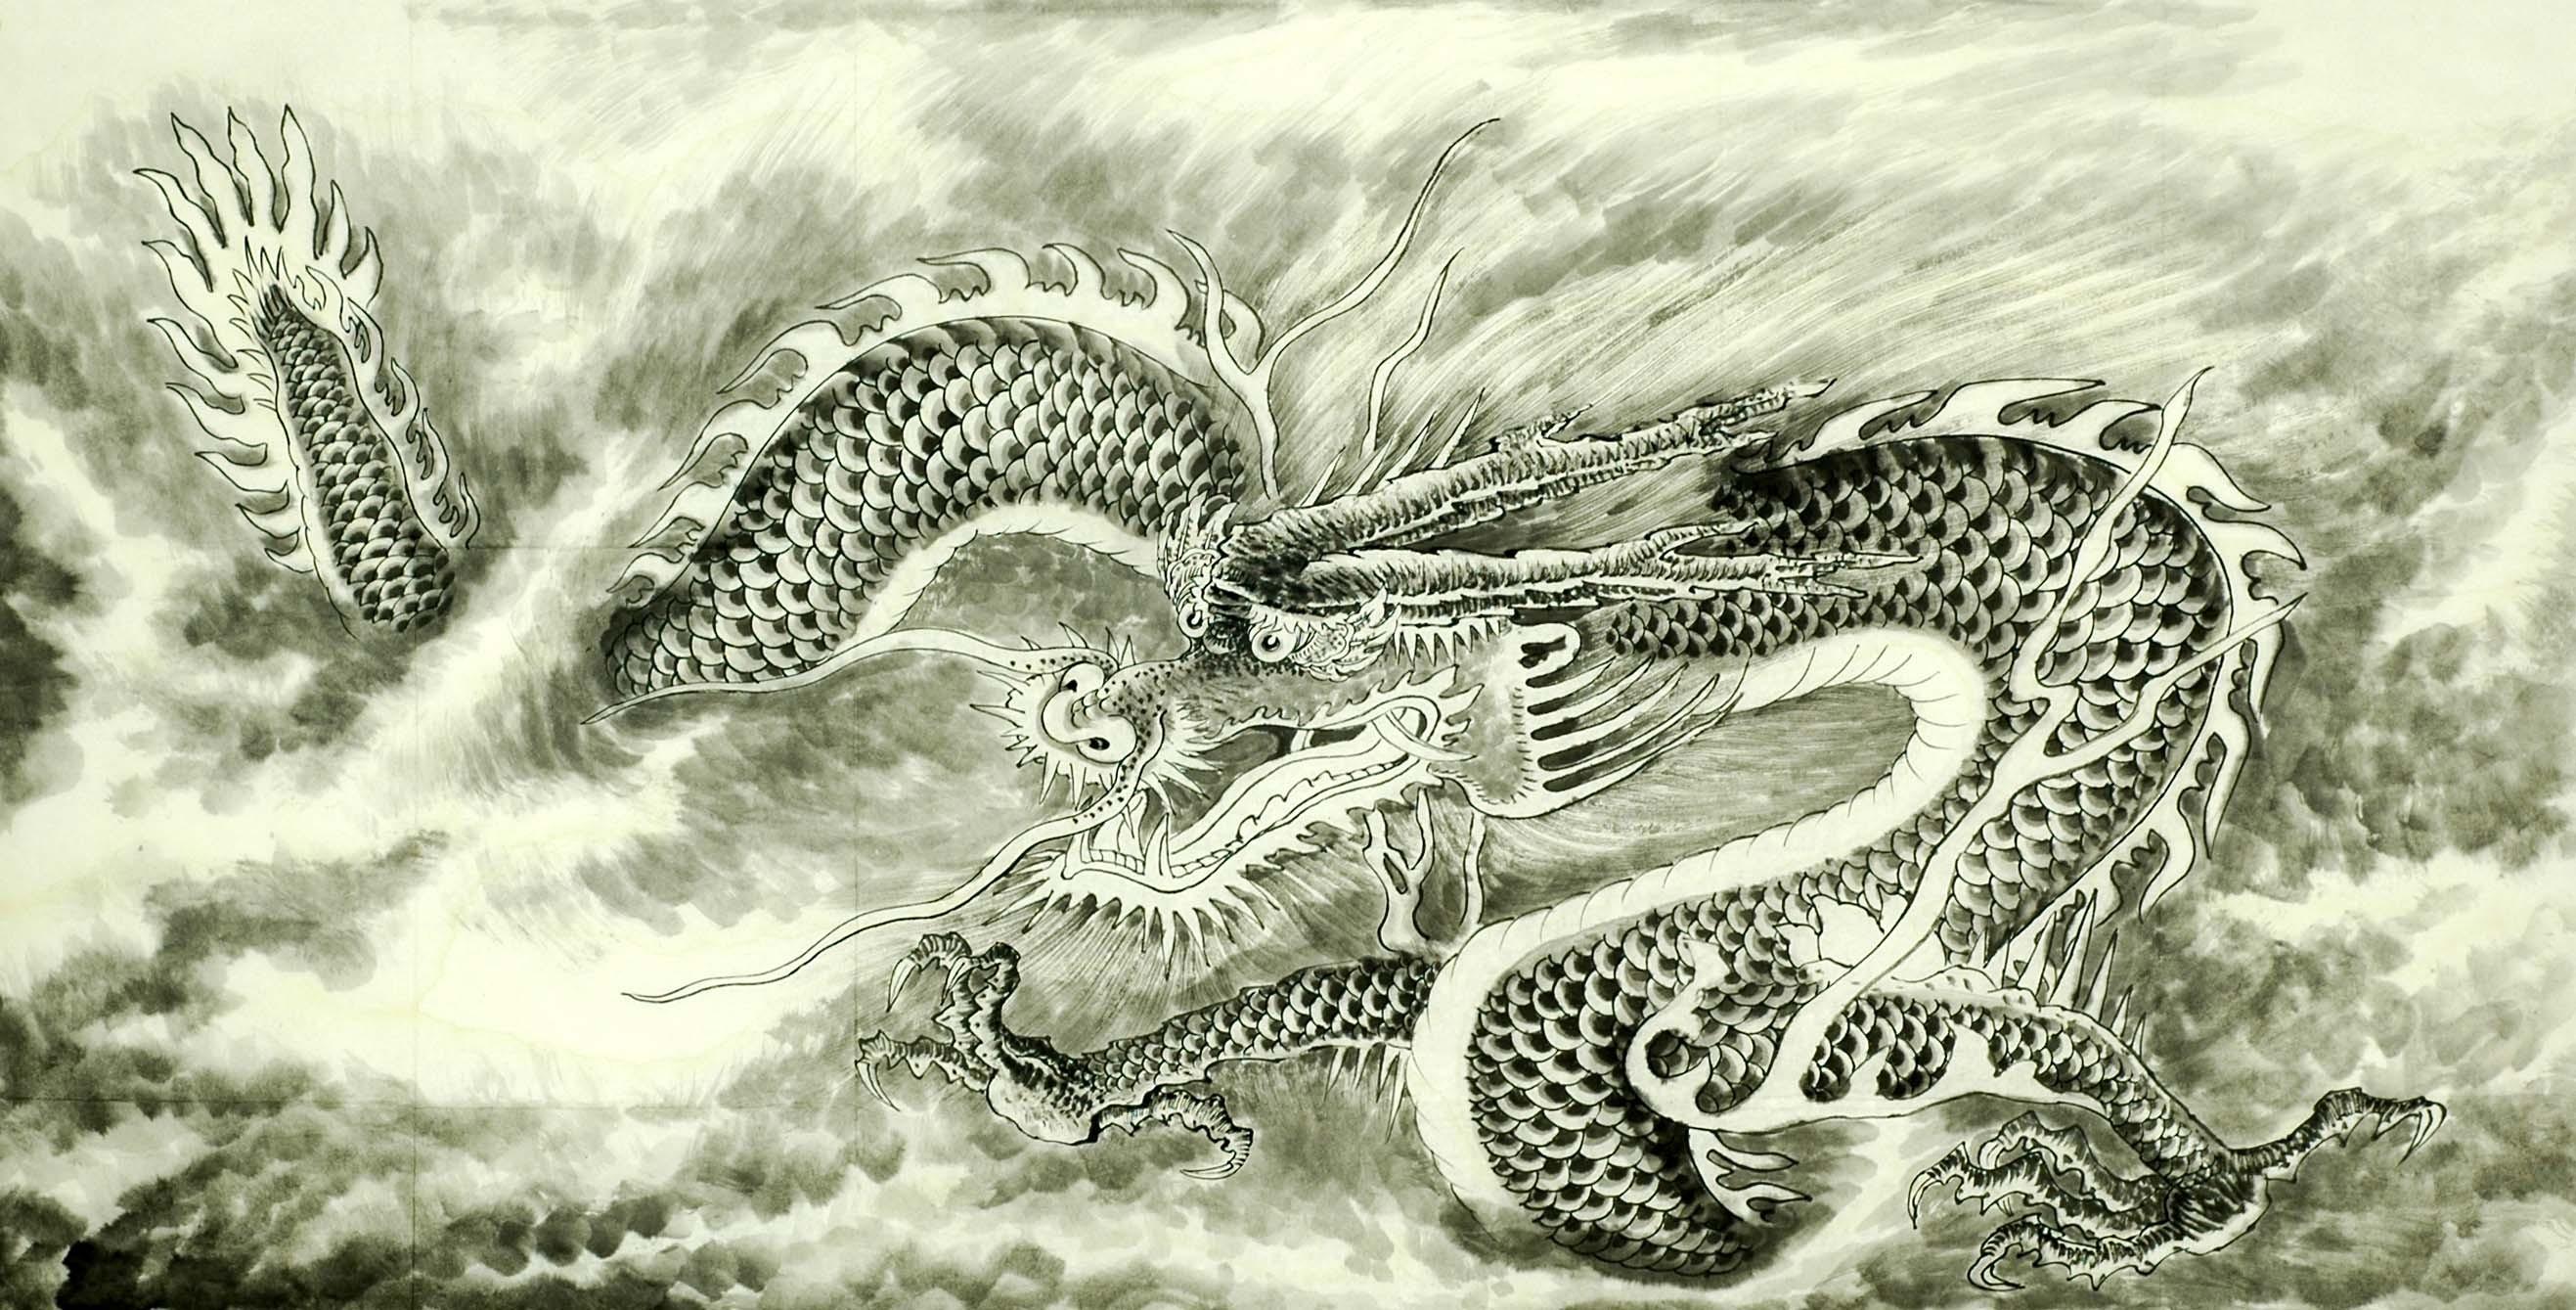 Chinese Dragon Painting. Explore collection